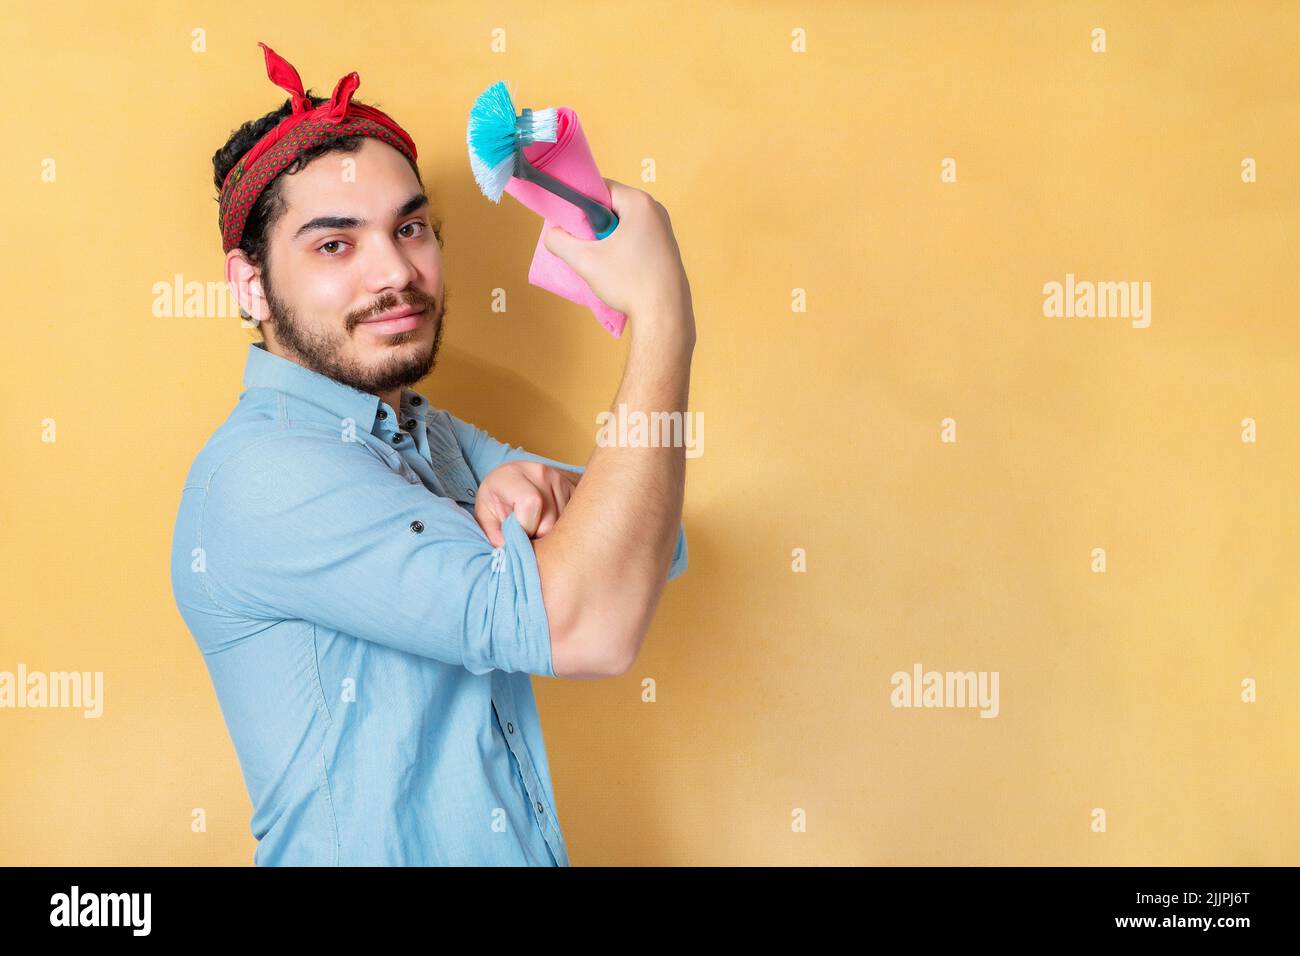 A man flexing his muscle and supporting feminism holding cloth and cleaning brush Stock Photo